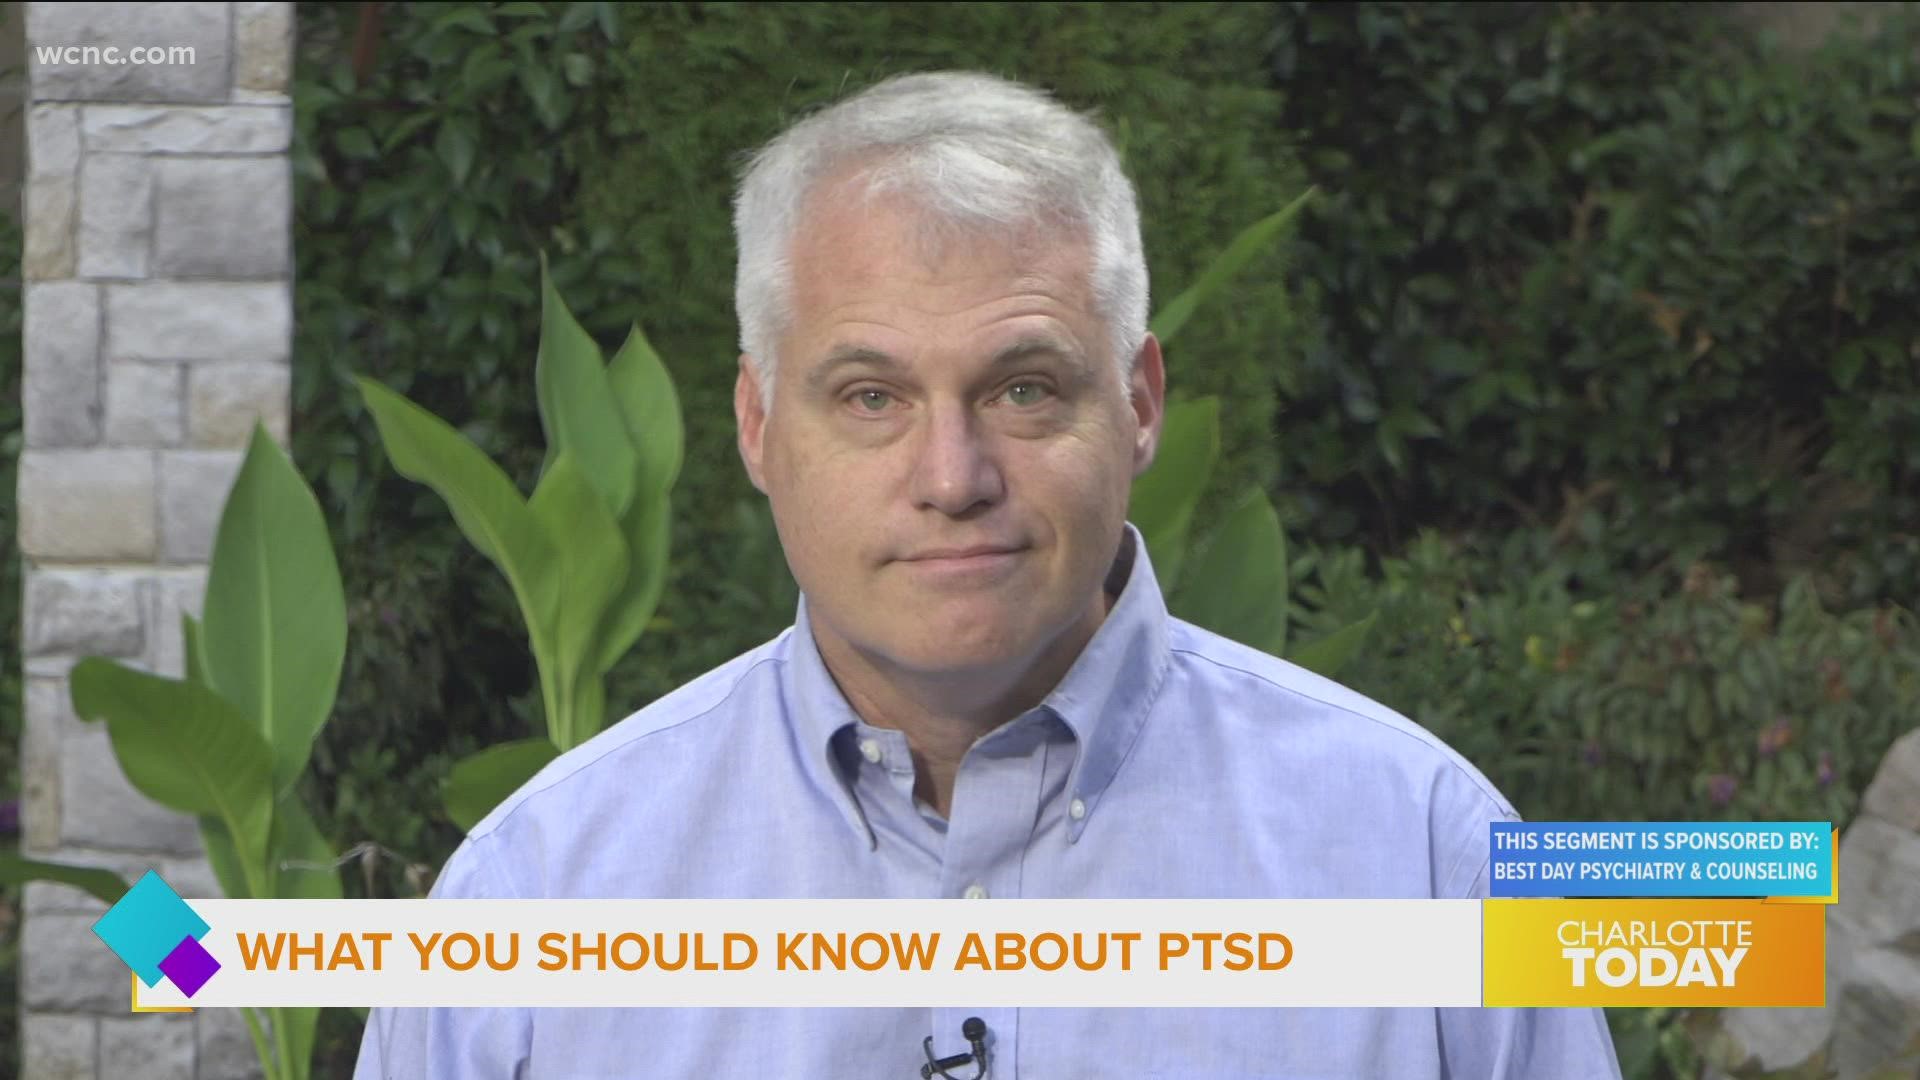 Recognizing the signs and symptoms of PTSD and getting help